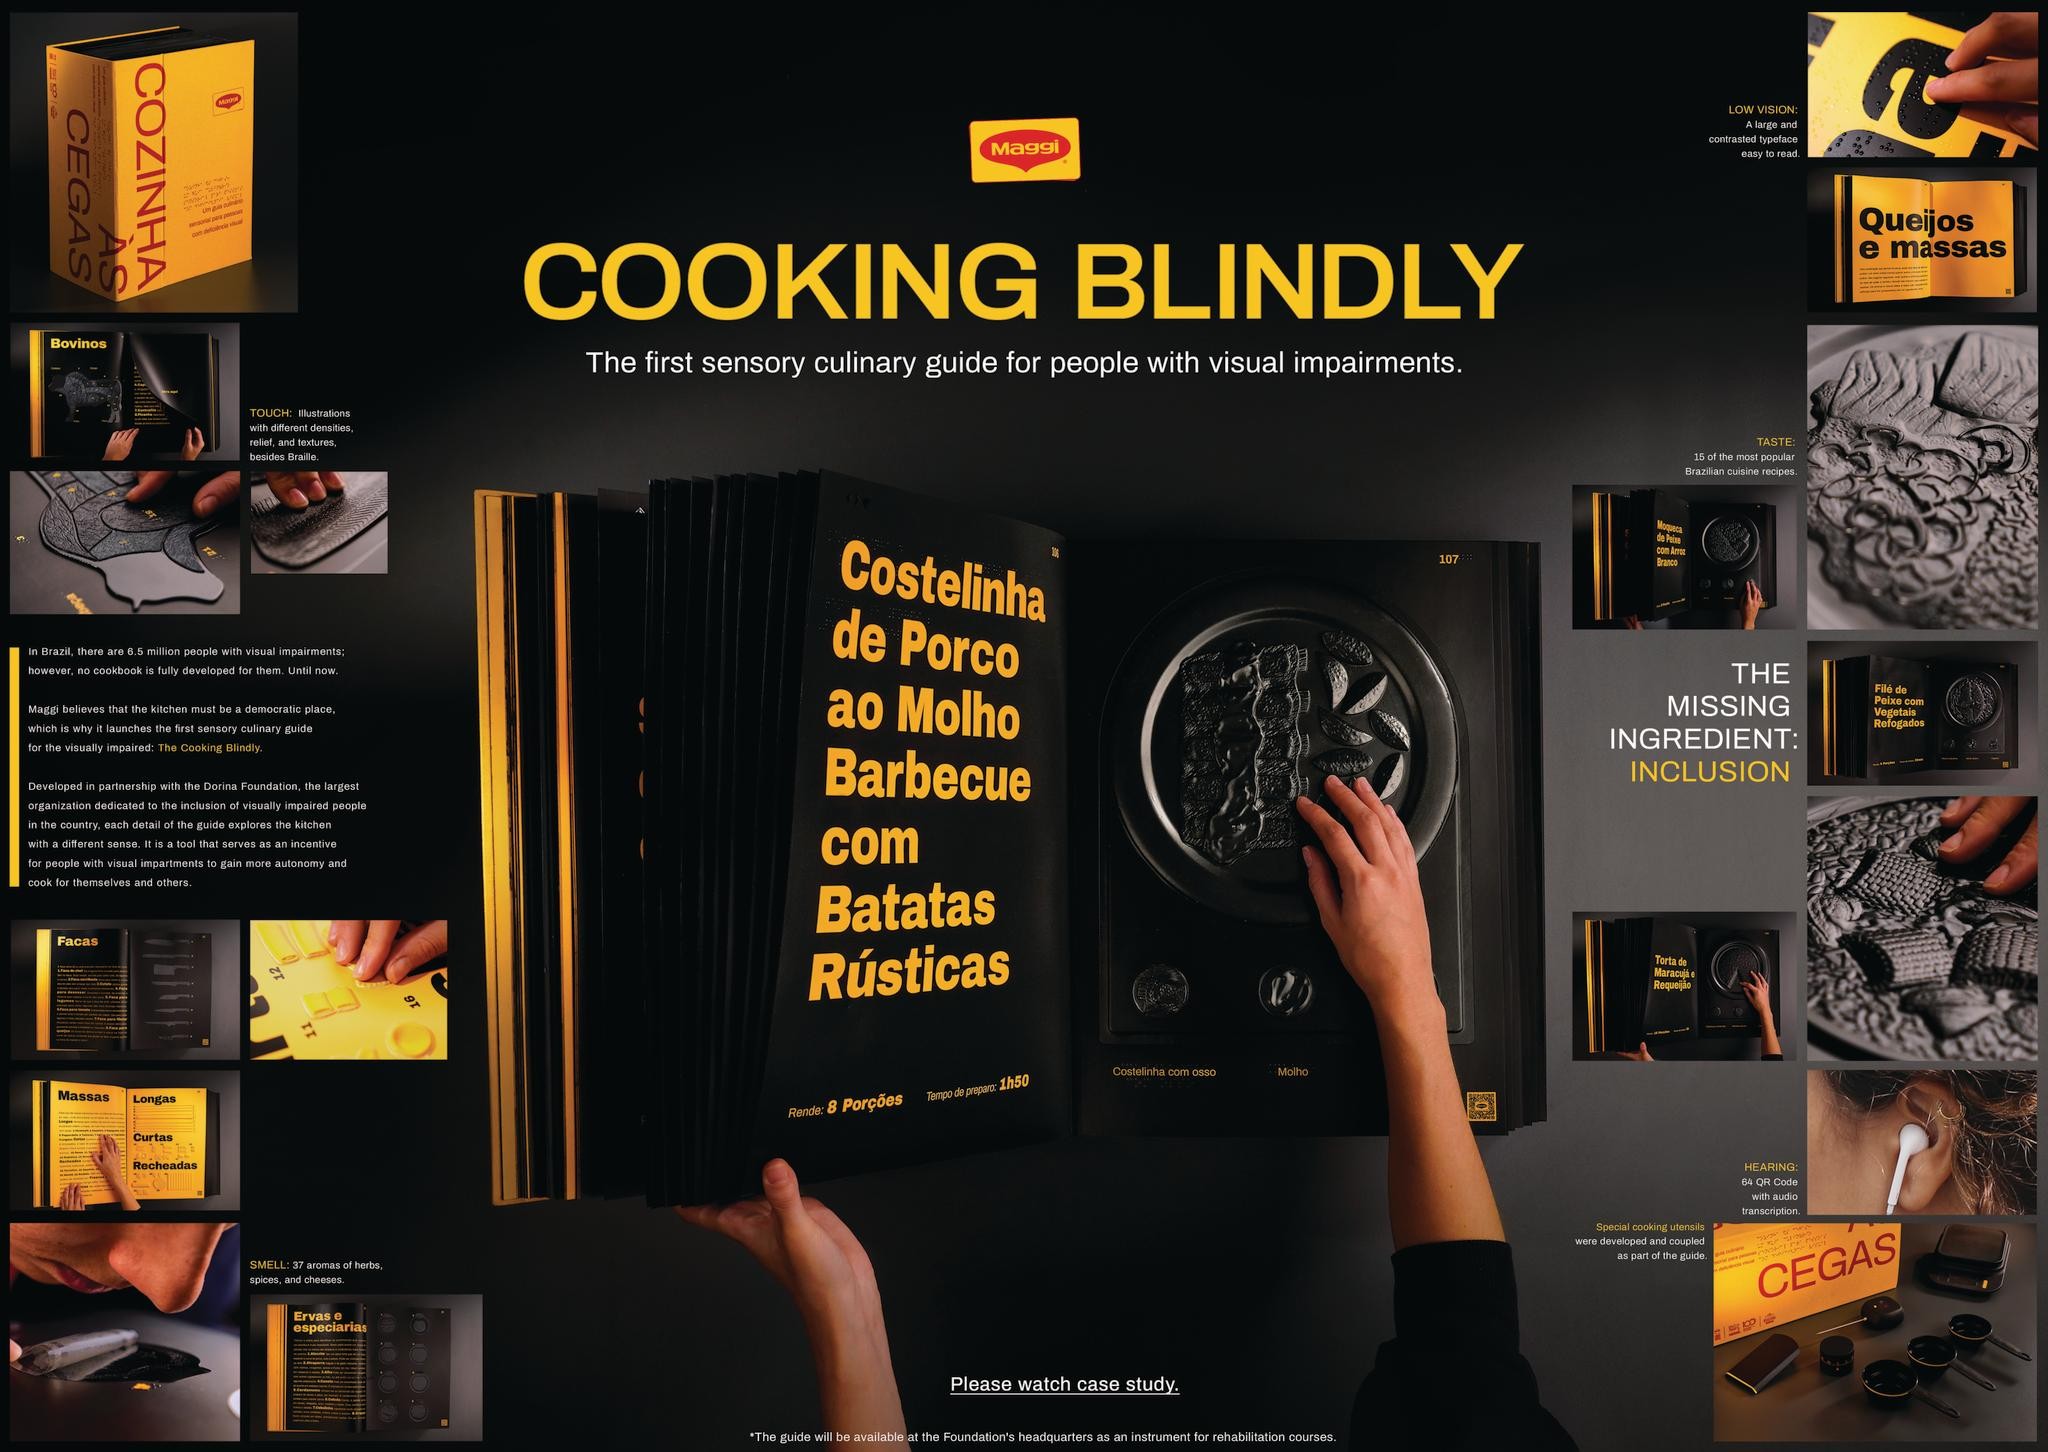 COOKING BLINDLY